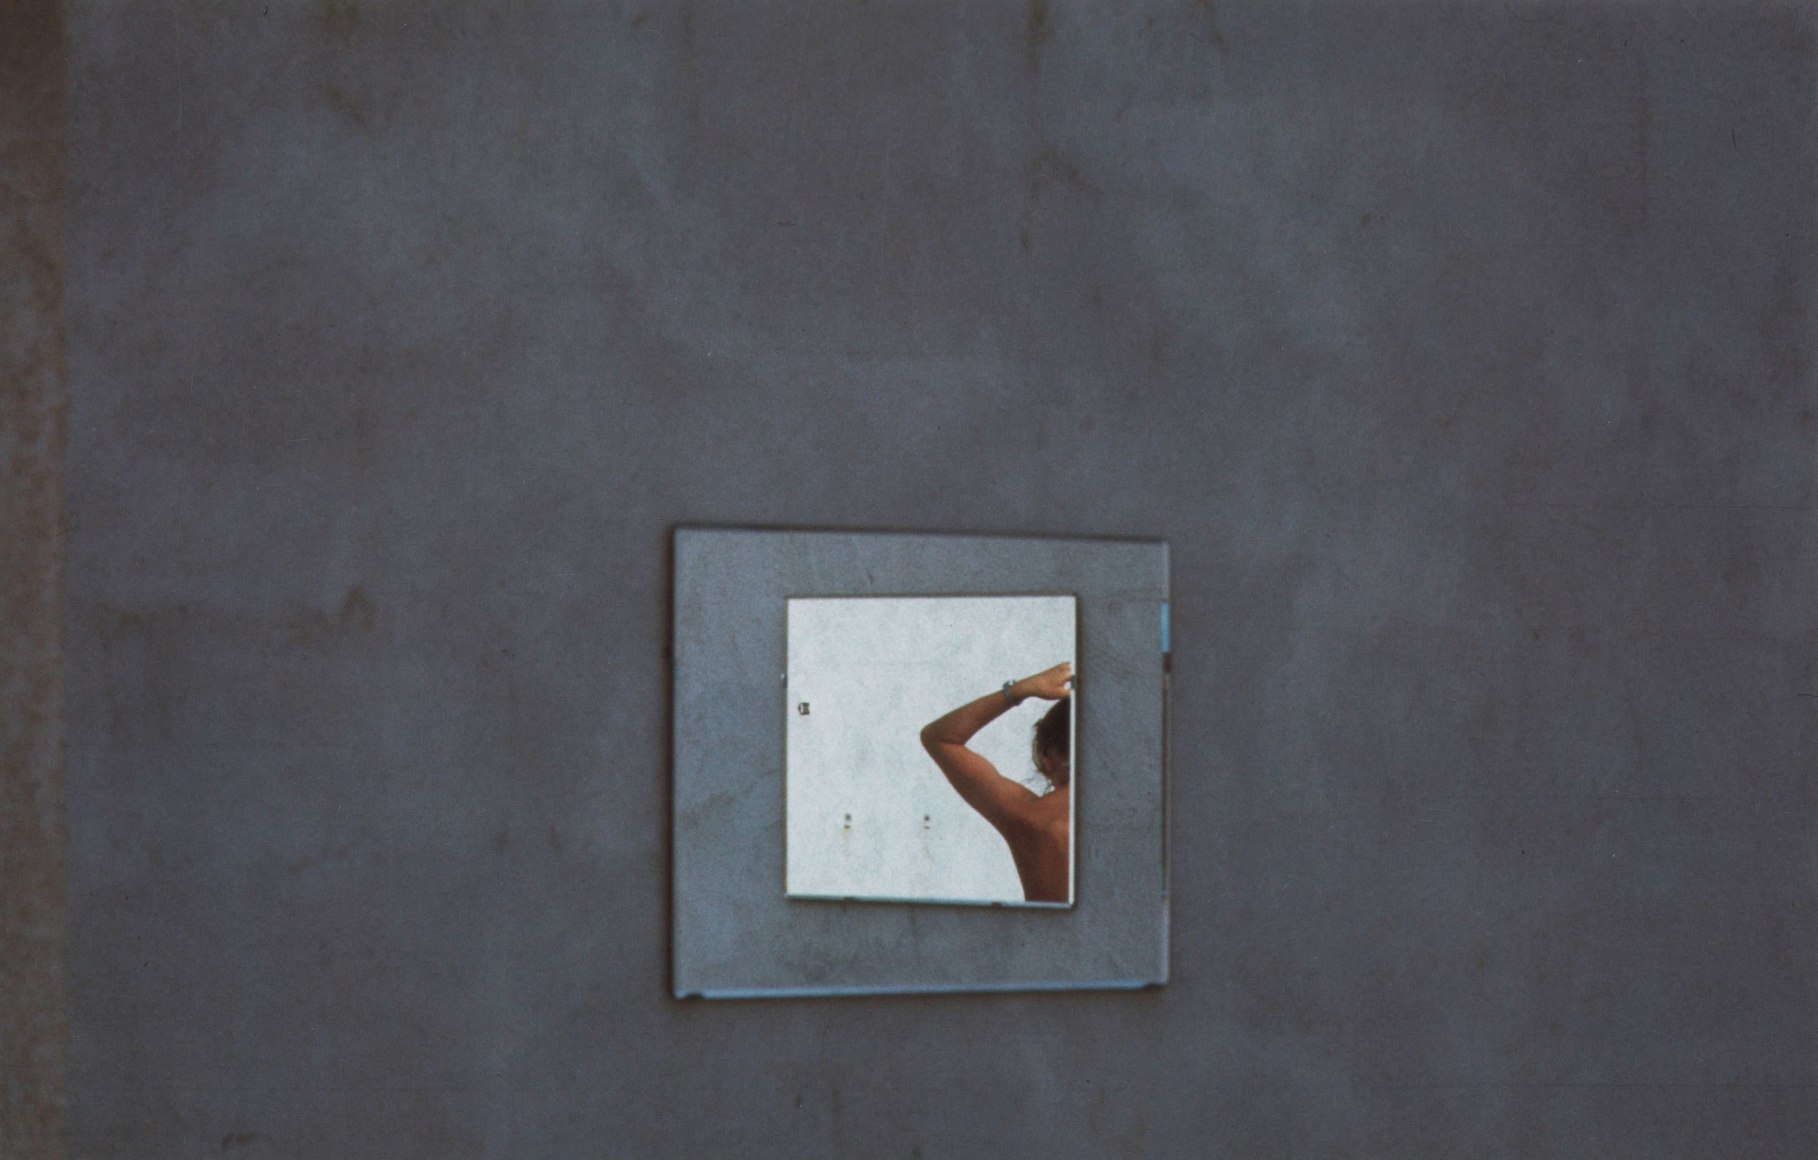 Luigi Ghirri, Untitled, ​1976. Color photograph of a blue wall with two concentric squares in the center. The innermost shows the left arm, upper back, and head of a nude figure facing away, reaching upward to their hair.